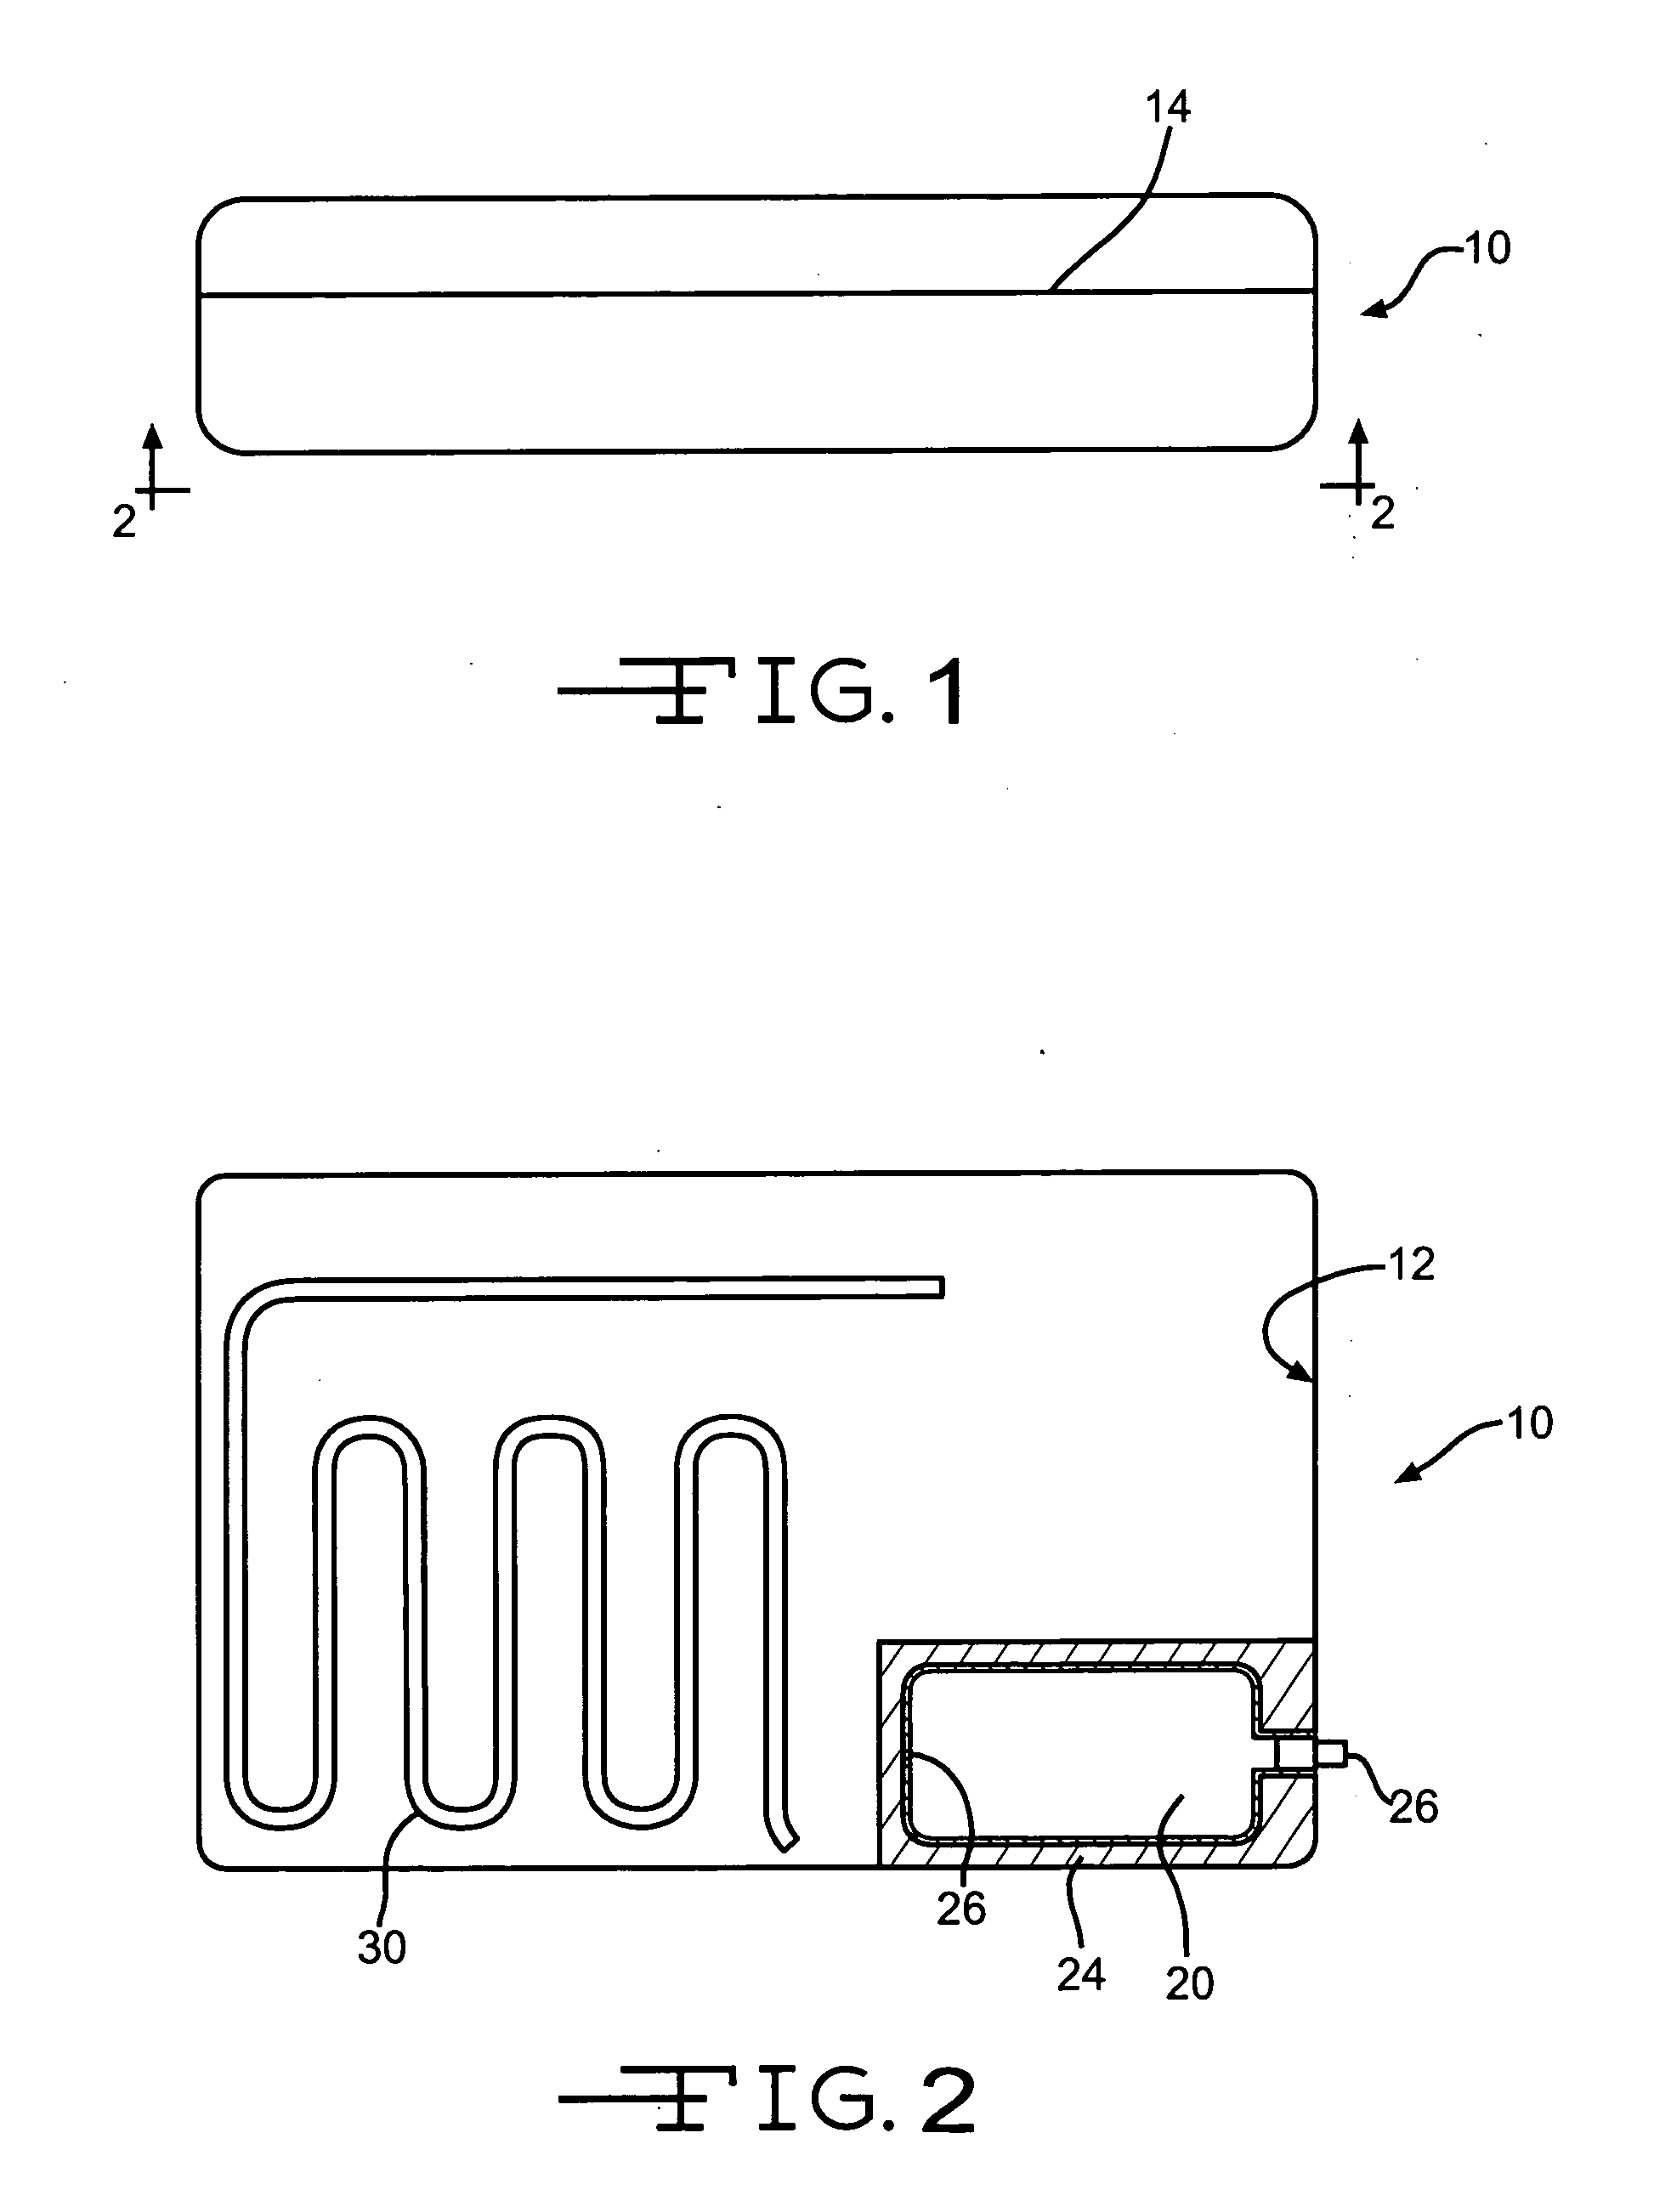 Emergency brain cooling device and method of use